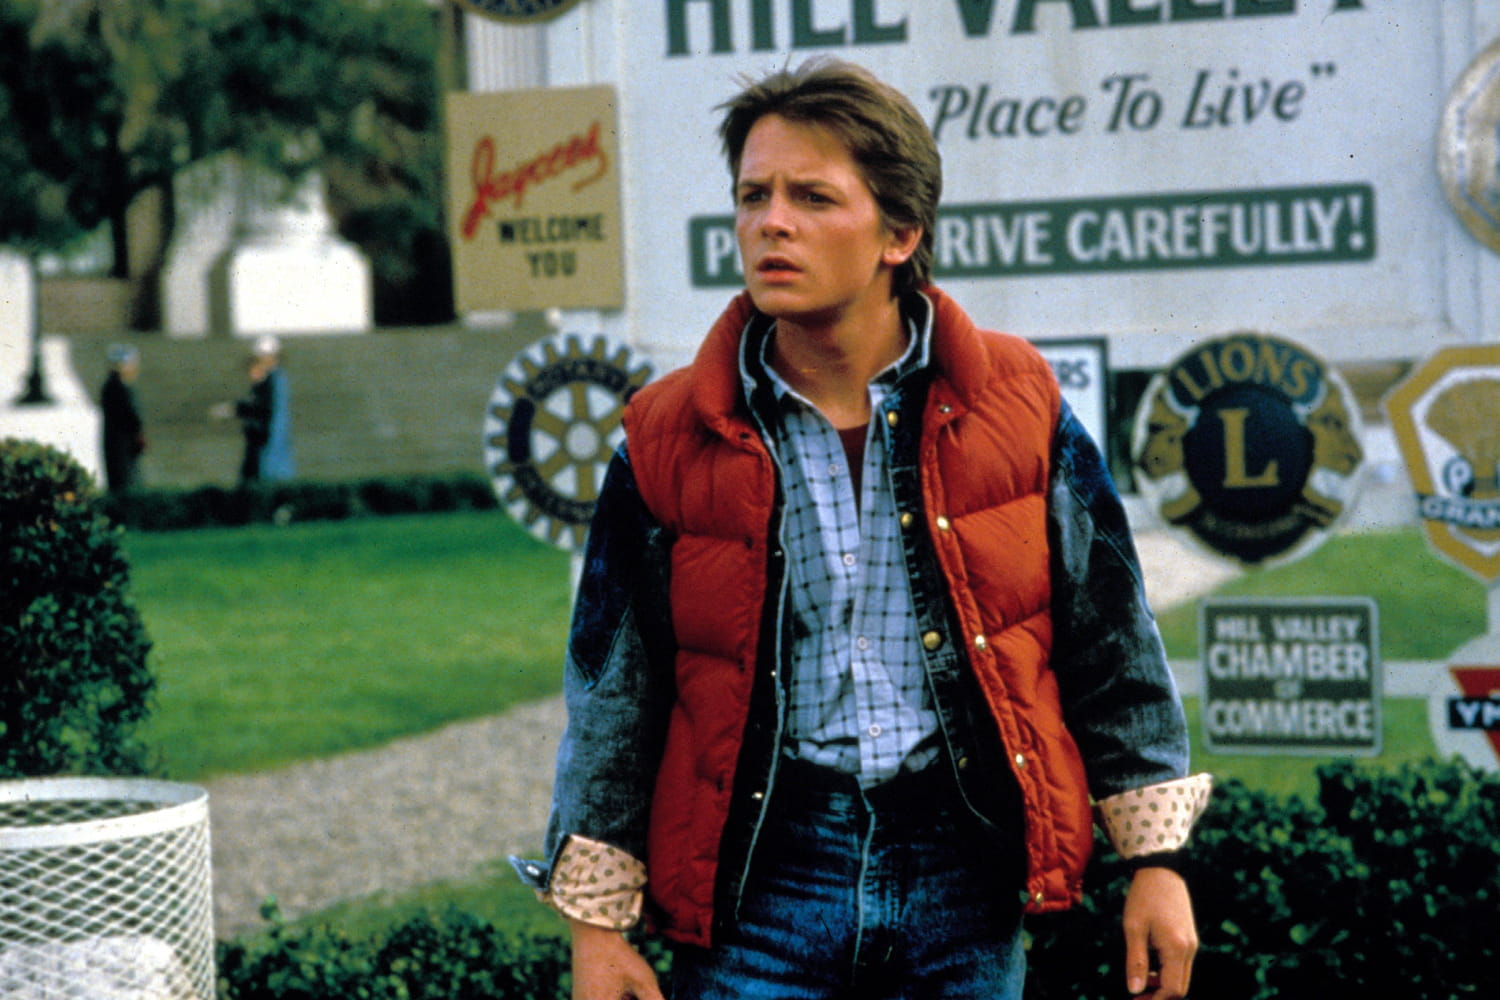 "i'm Kind Of A Freak": Michael J. Fox Discusses 30 Years Of Parkinson's